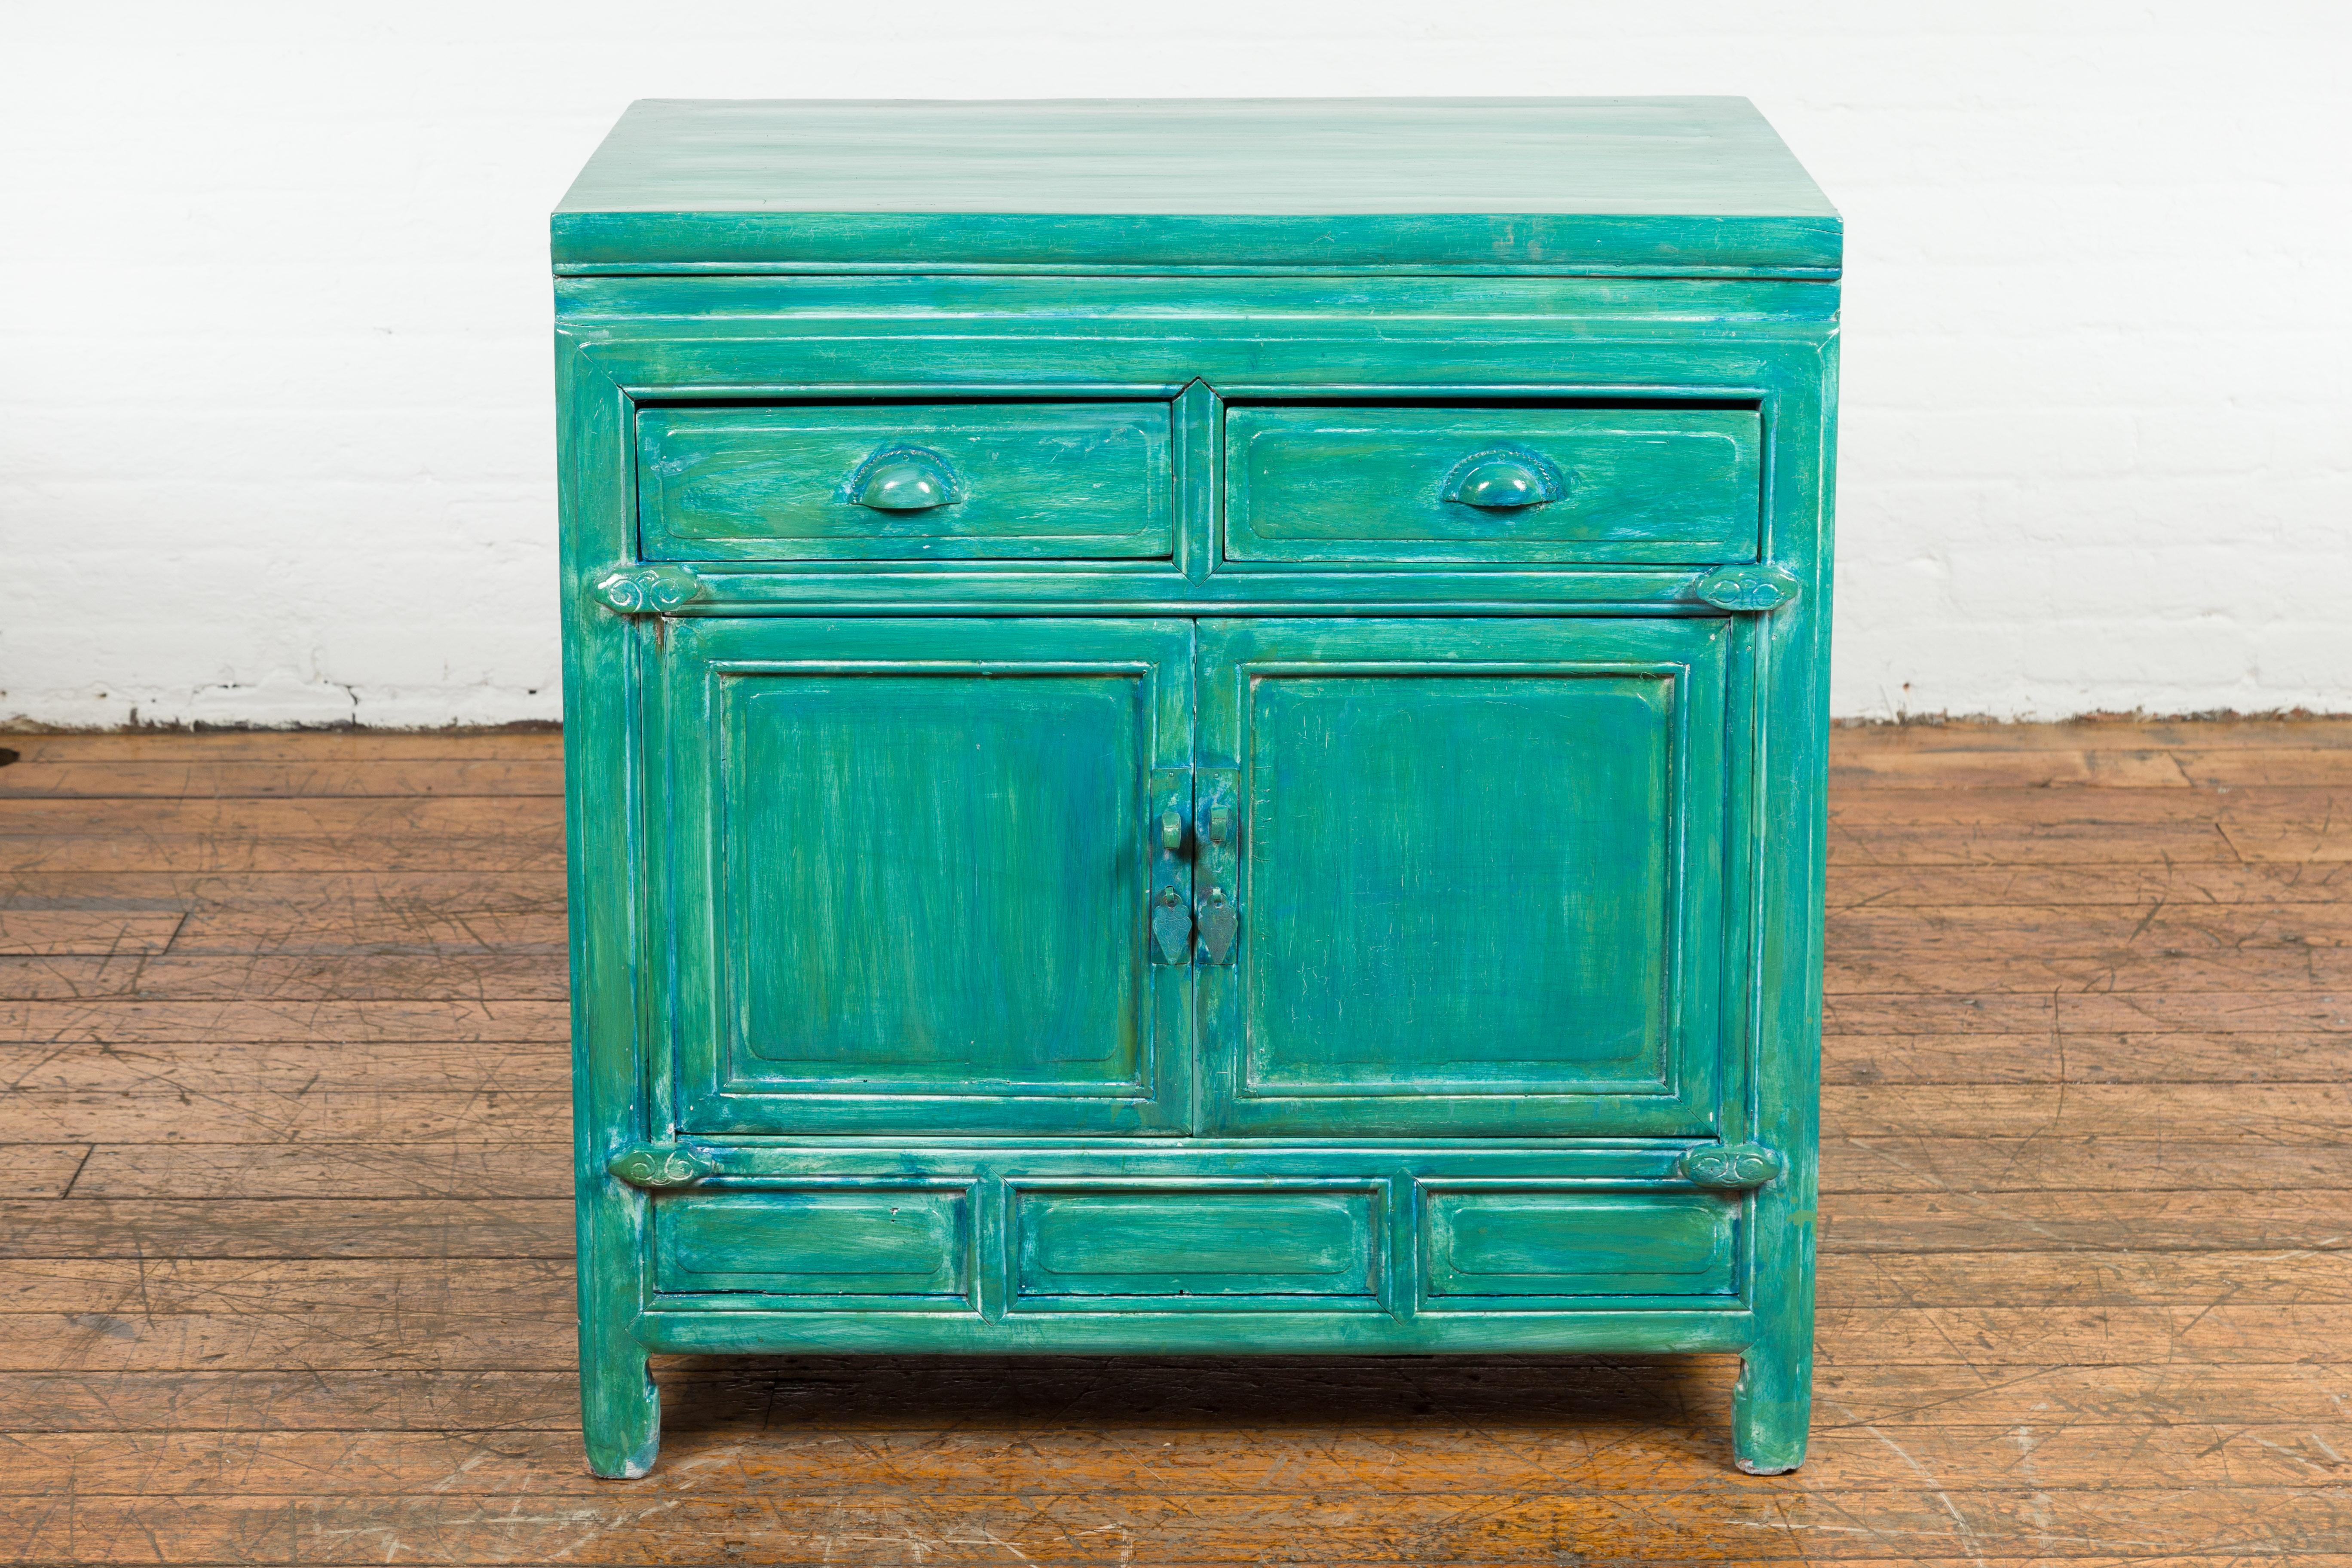 A Chinese late Qing Dynasty period side cabinet from the early 20th century, with two drawers over two doors, horse hoof feet and custom aqua teal hand painted finish. Created in China during the late Qing Dynasty period in the early years of the